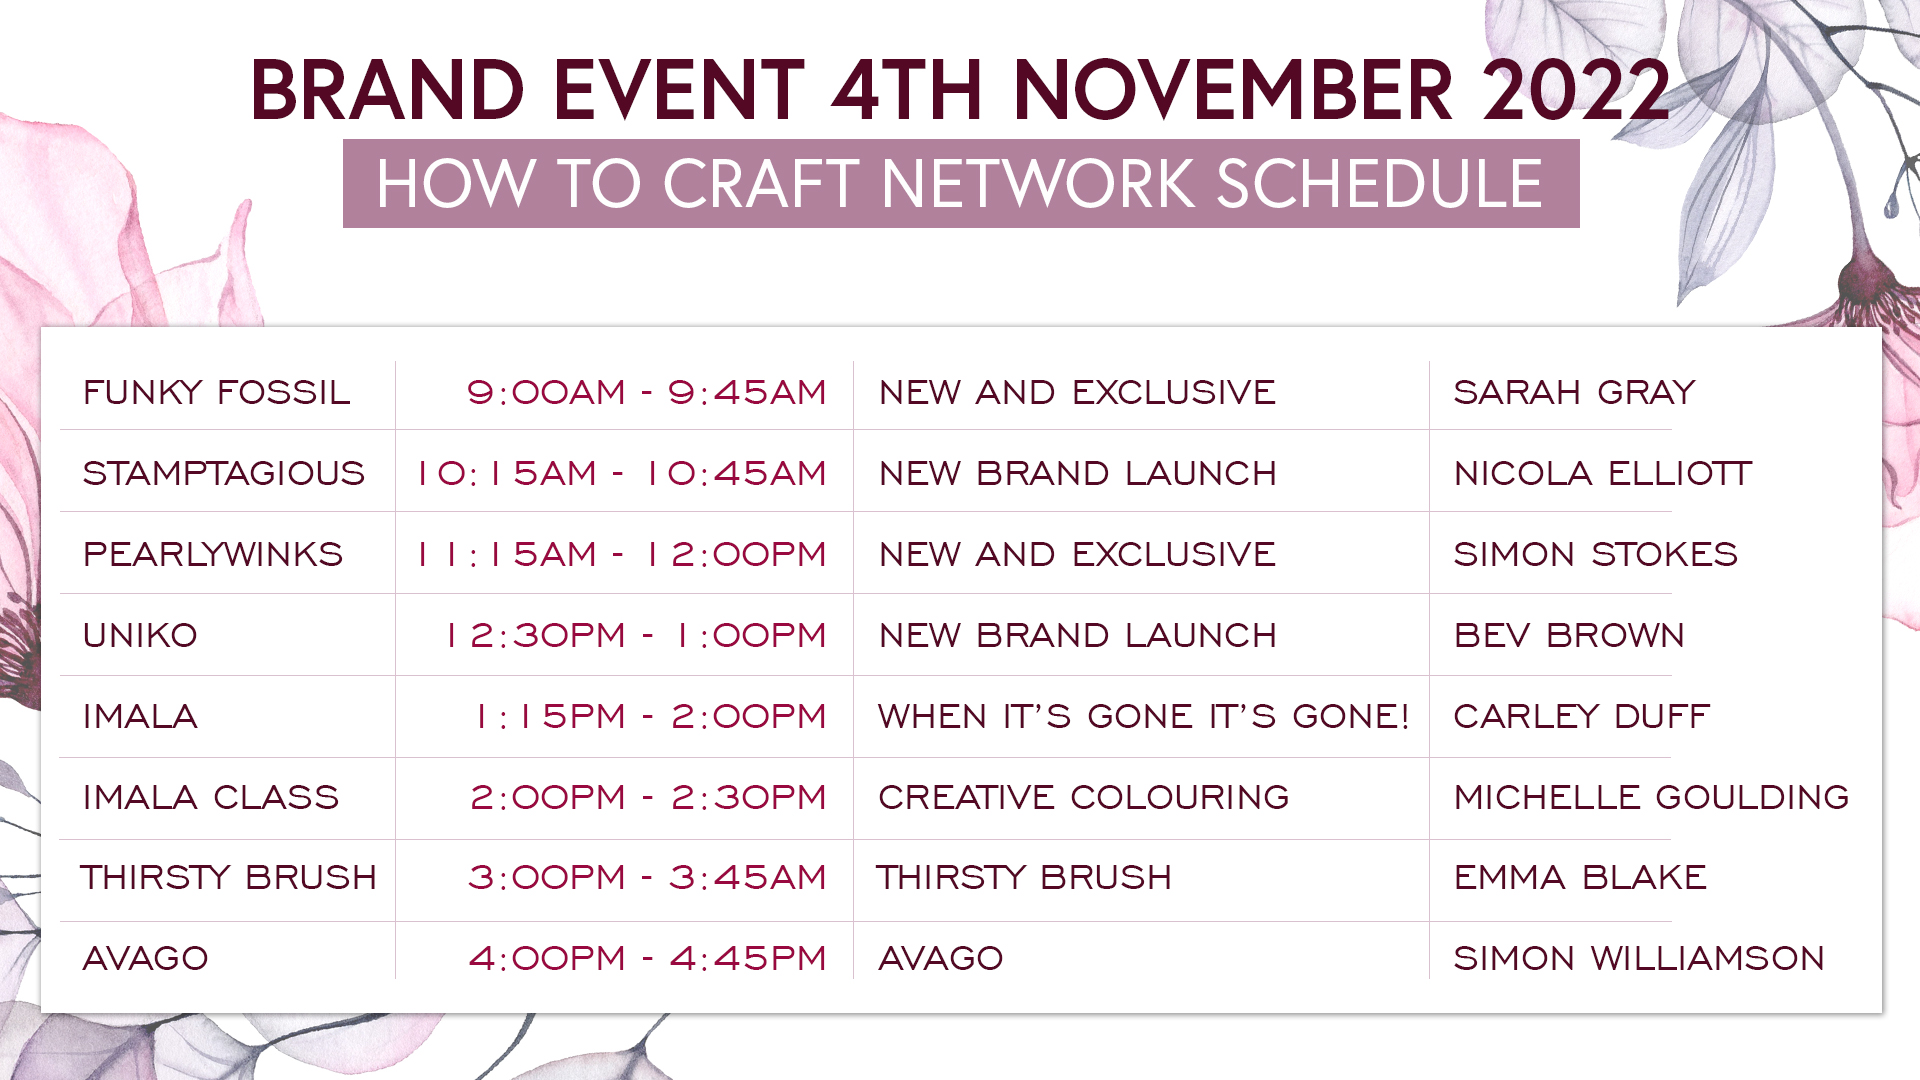 brand-showcase---join-stamptagious-for-this-much-loved-event-where-the-small-brands-get-to-shout-loudest---broadcast-4th-nov-22